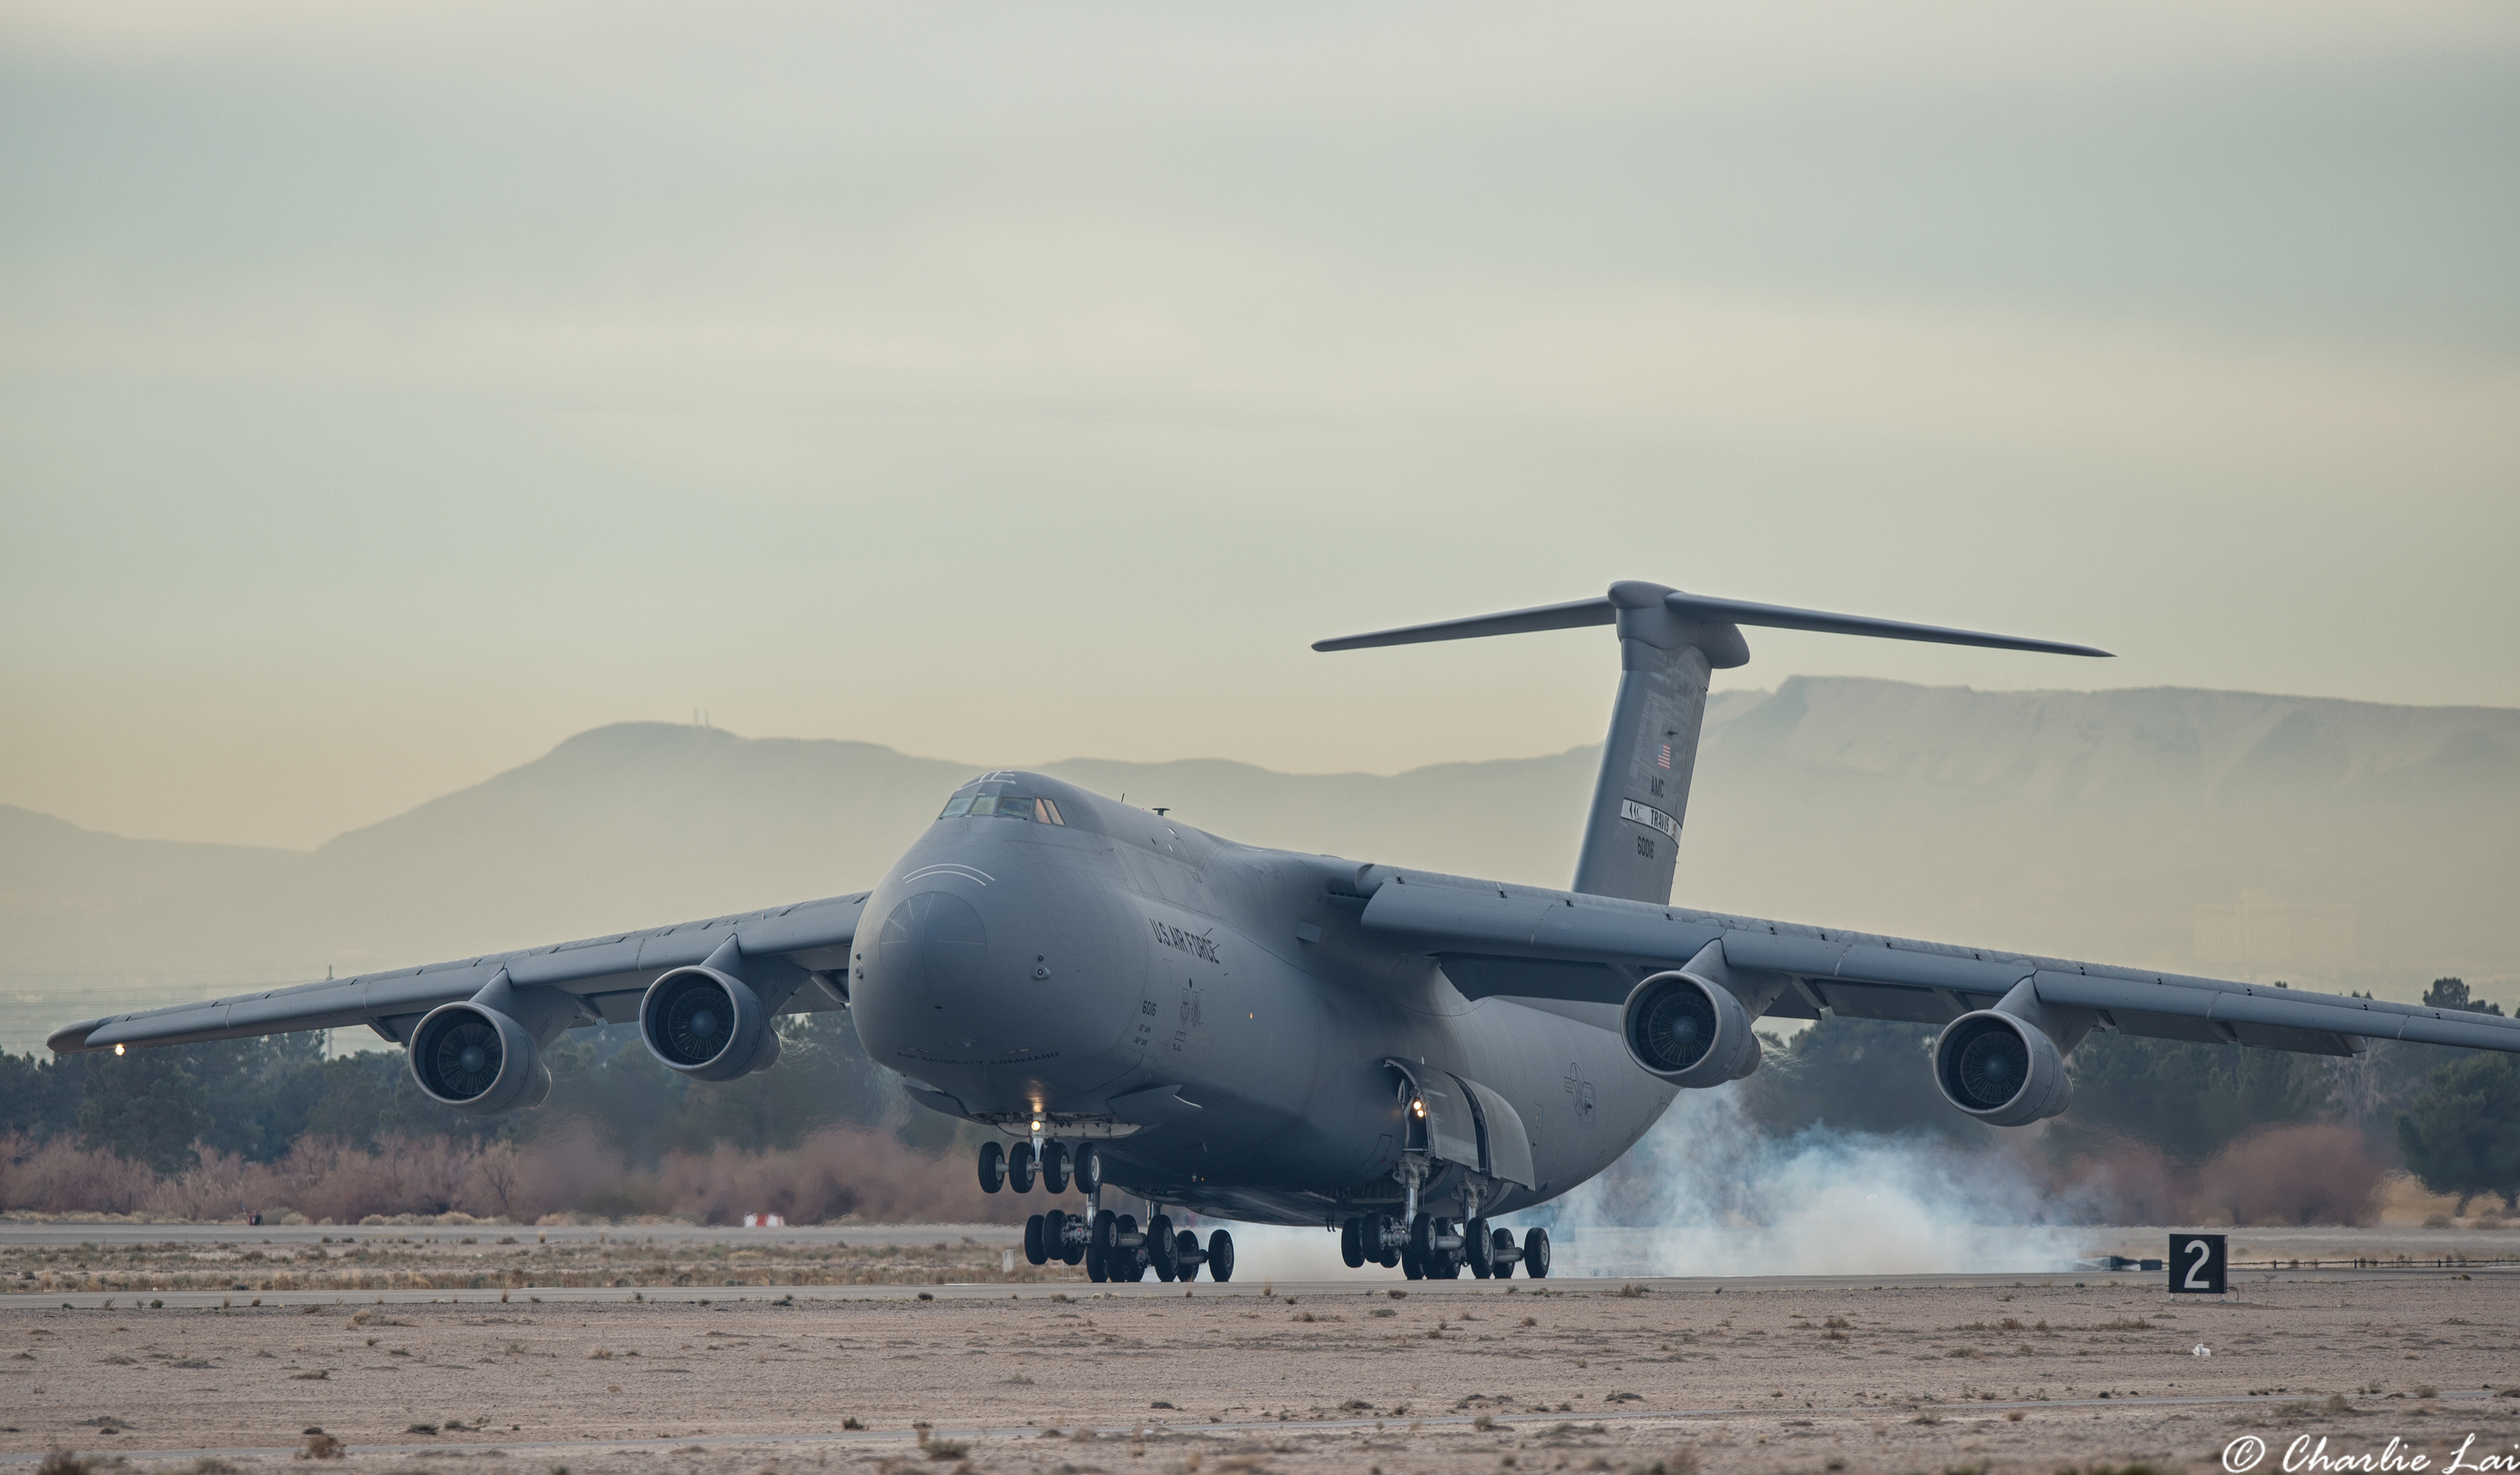 C-5 Galaxy briefly breaks up the strike launches